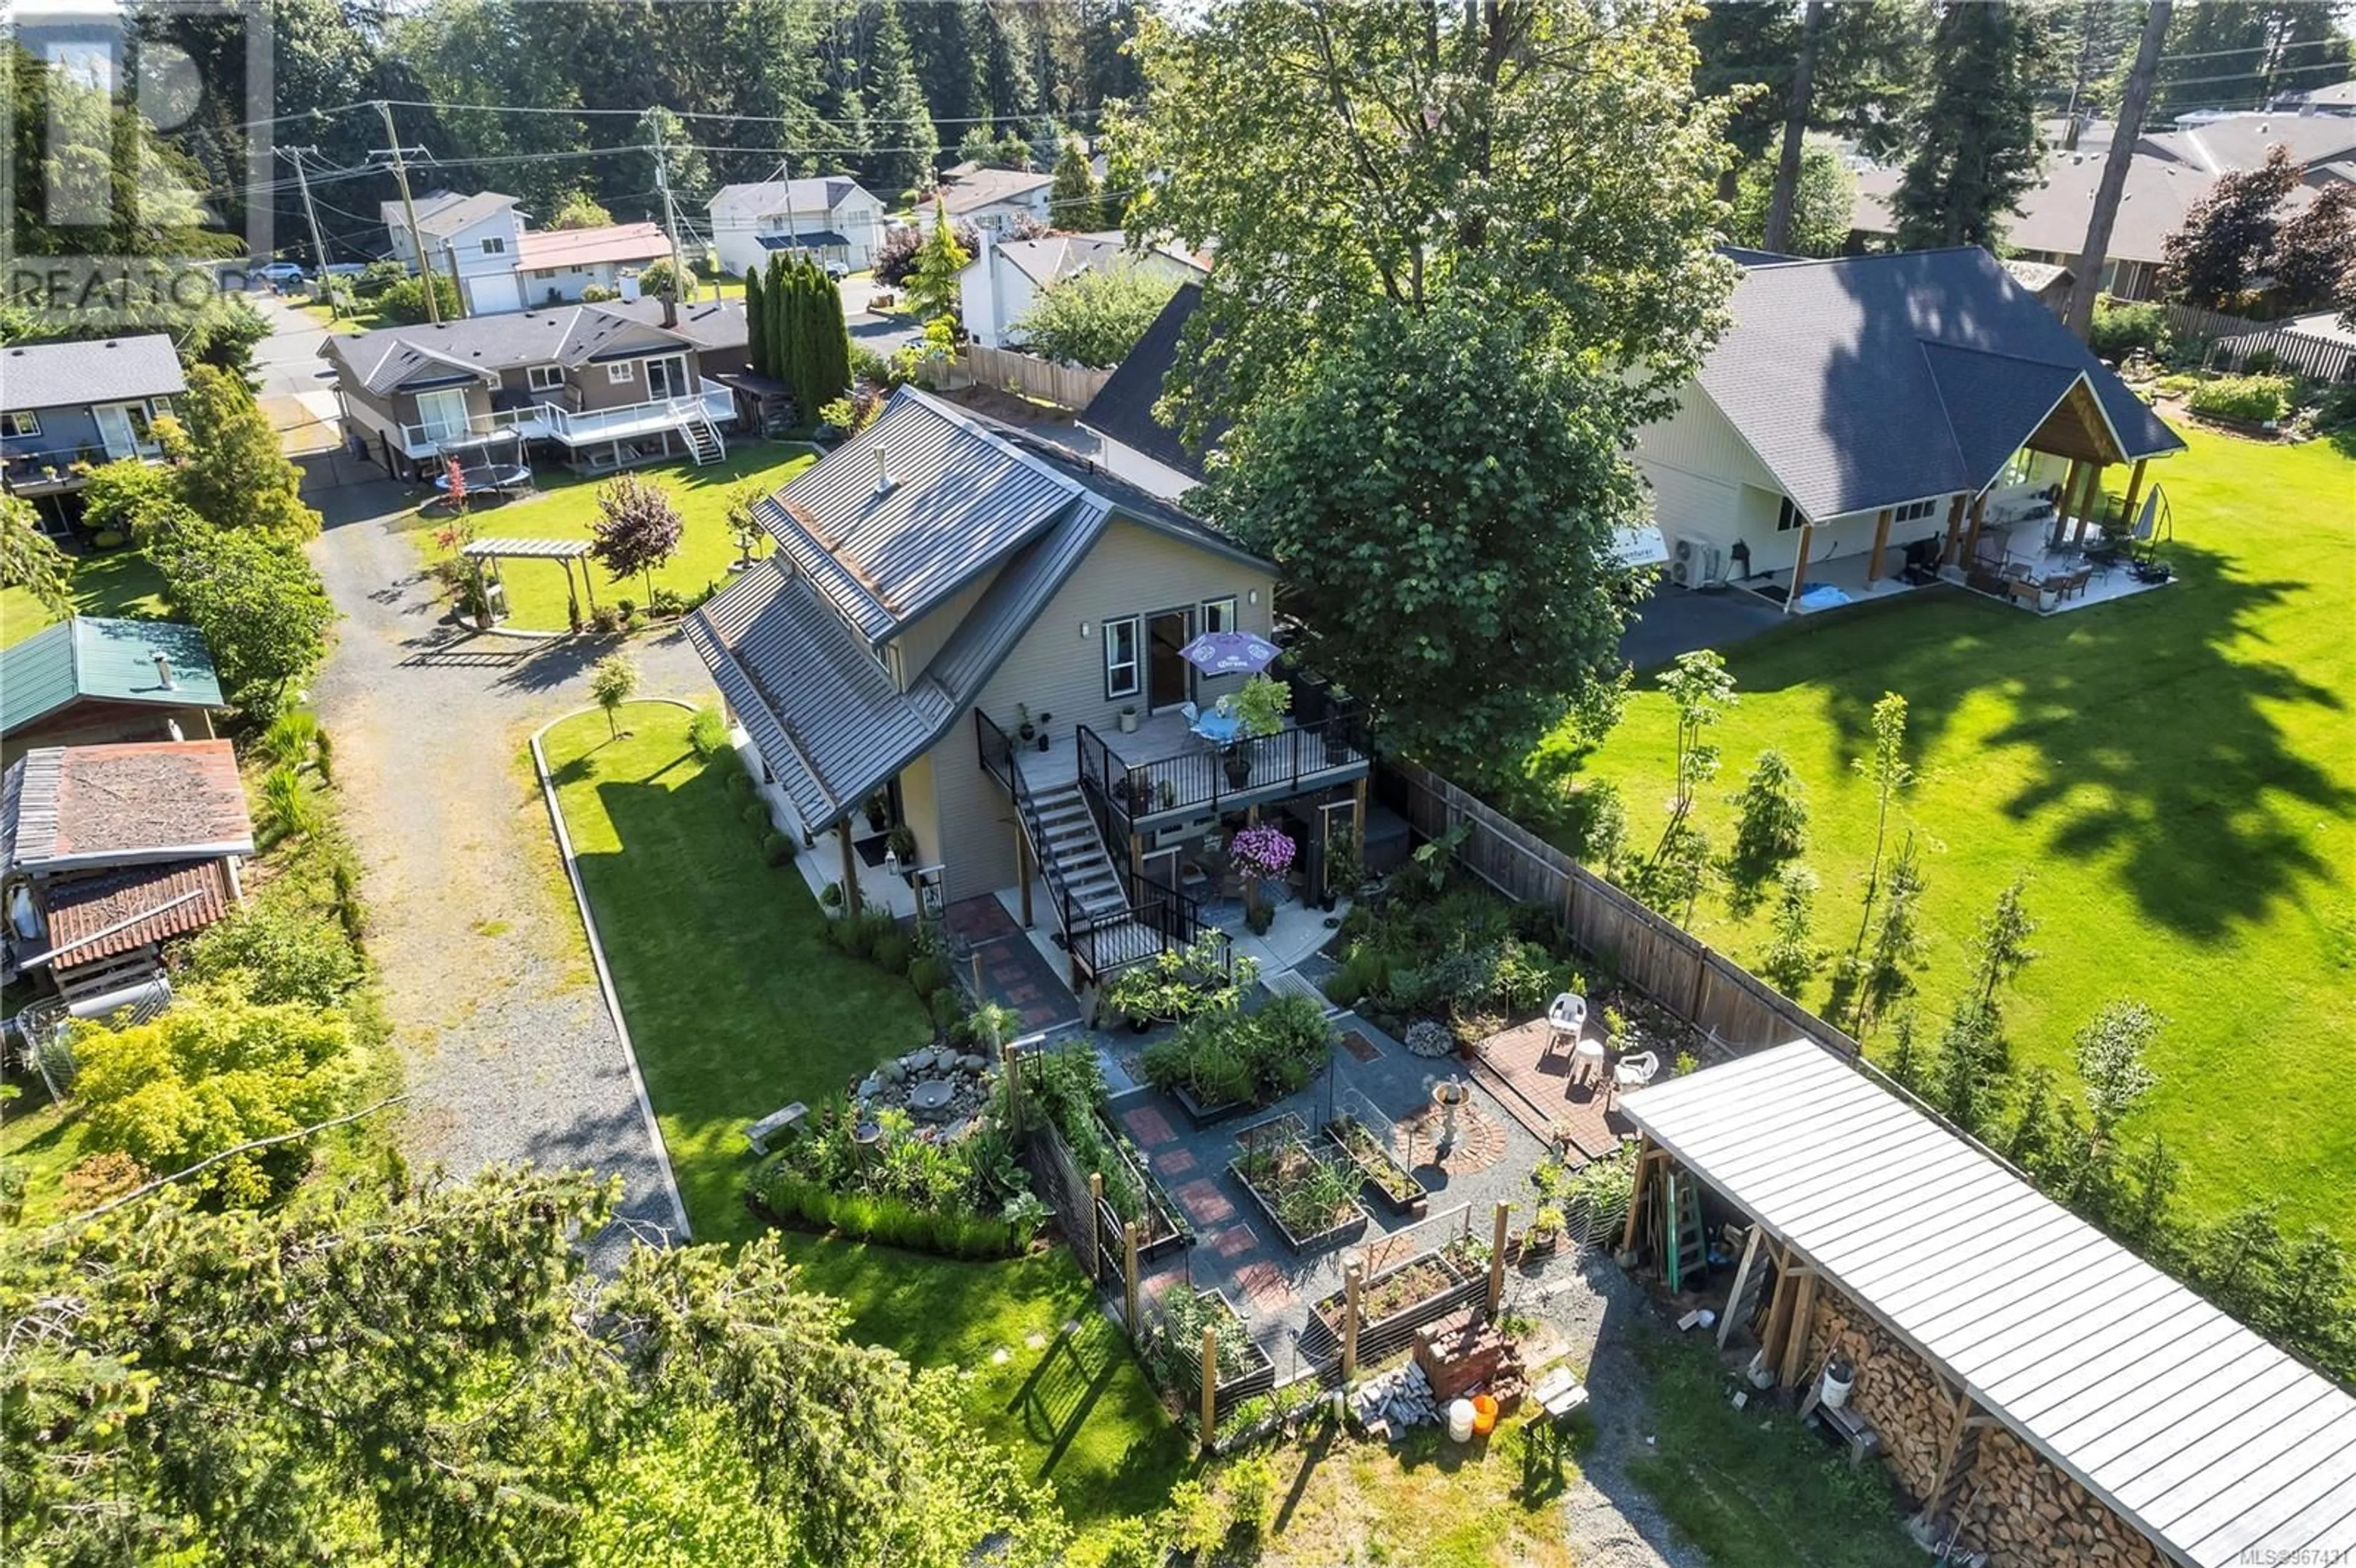 Patio for 355 Harrogate Rd, Campbell River British Columbia V9W1W1